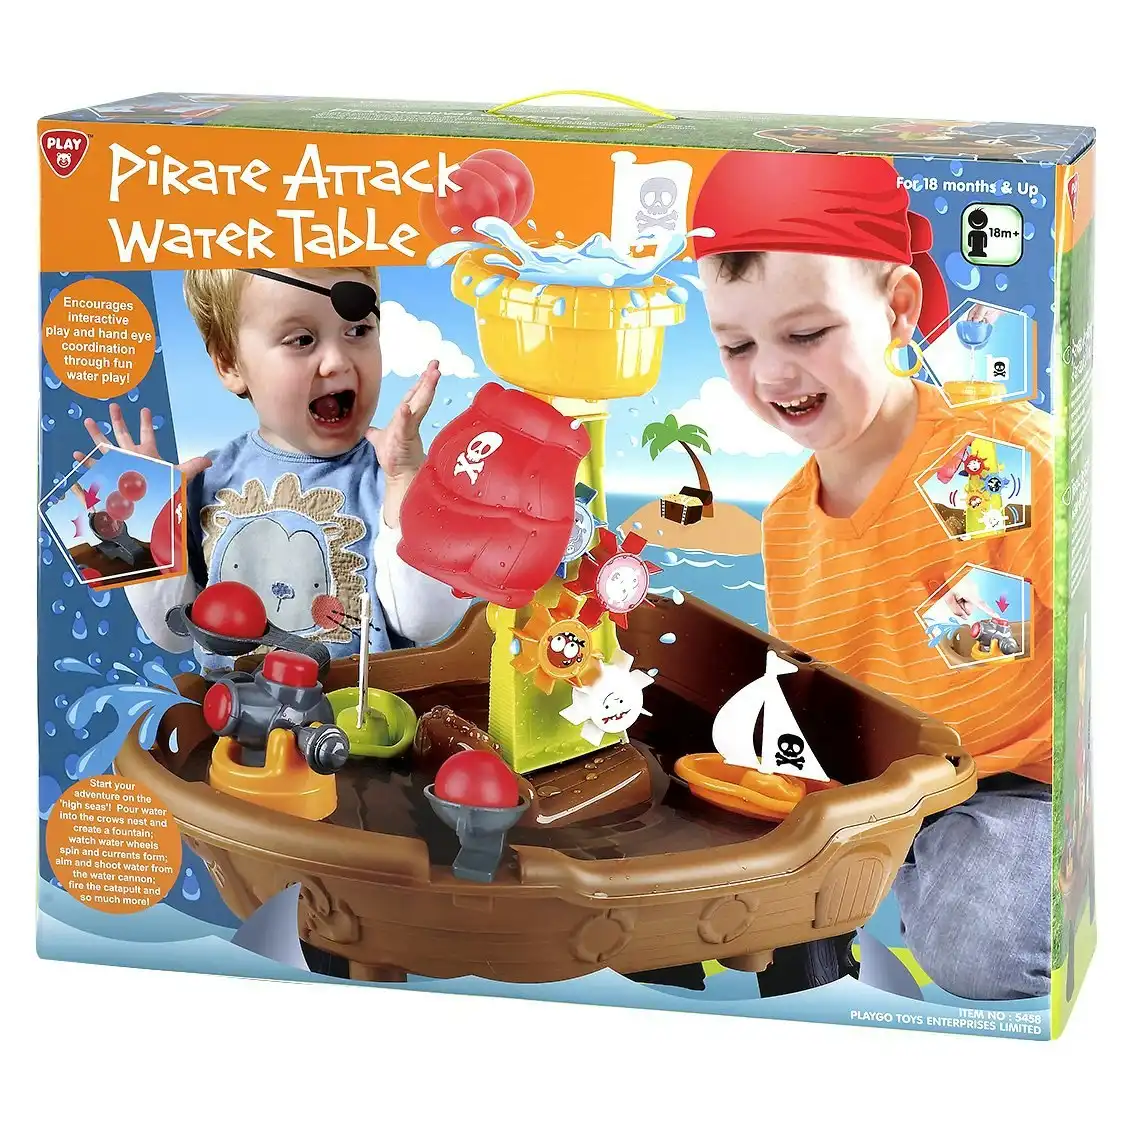 Pirate Attack Water Table Playgo Toys Ent. Ltd